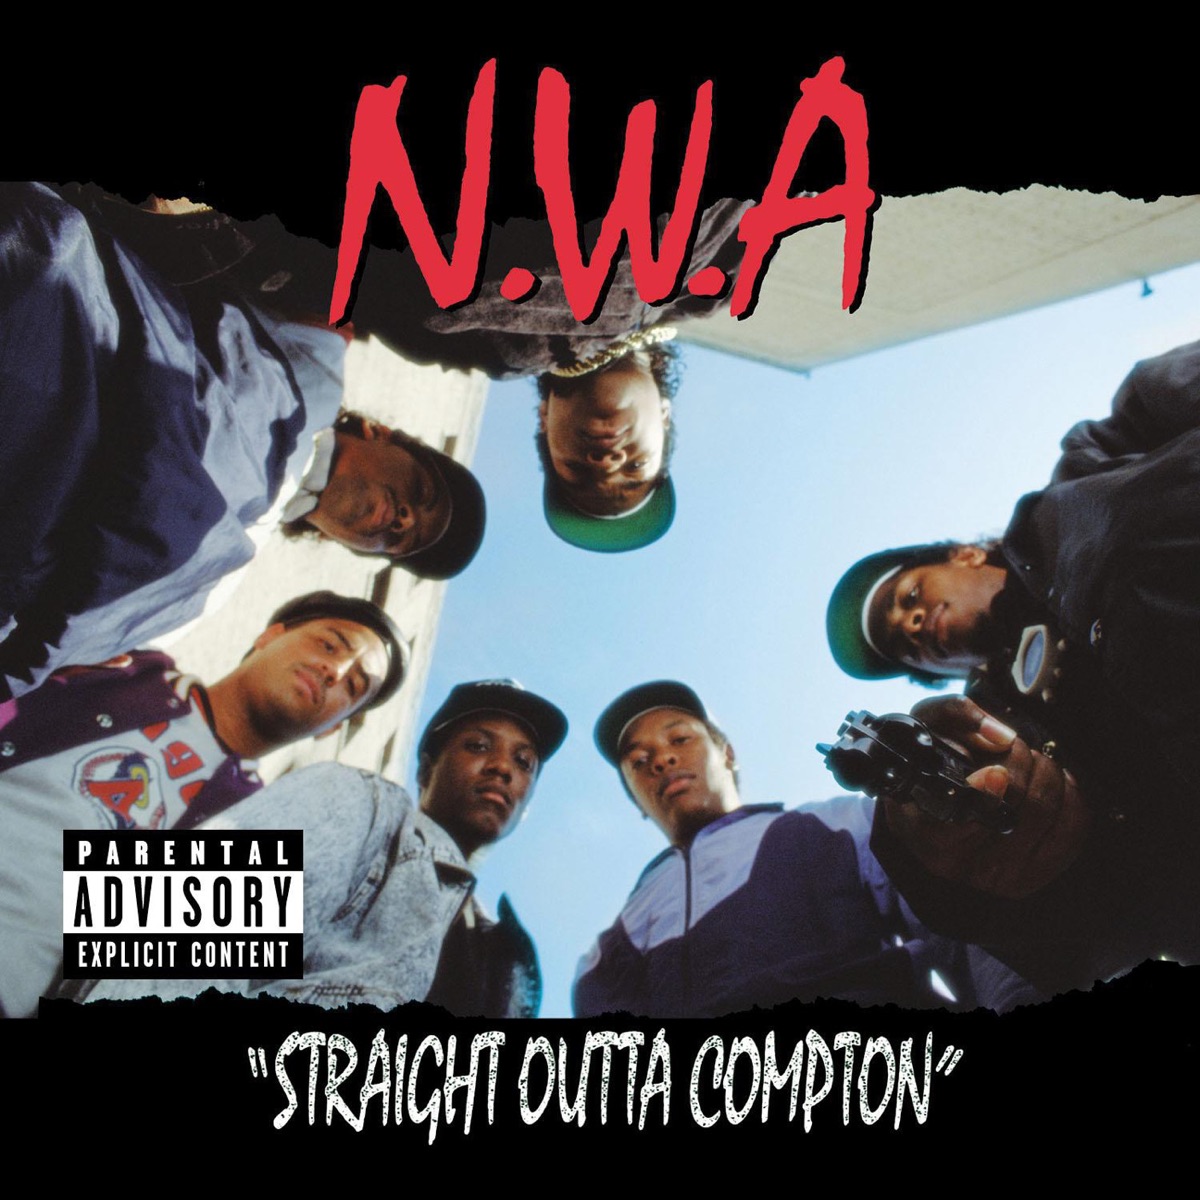 "Straight Outta Compton" by N.W.A. album cover